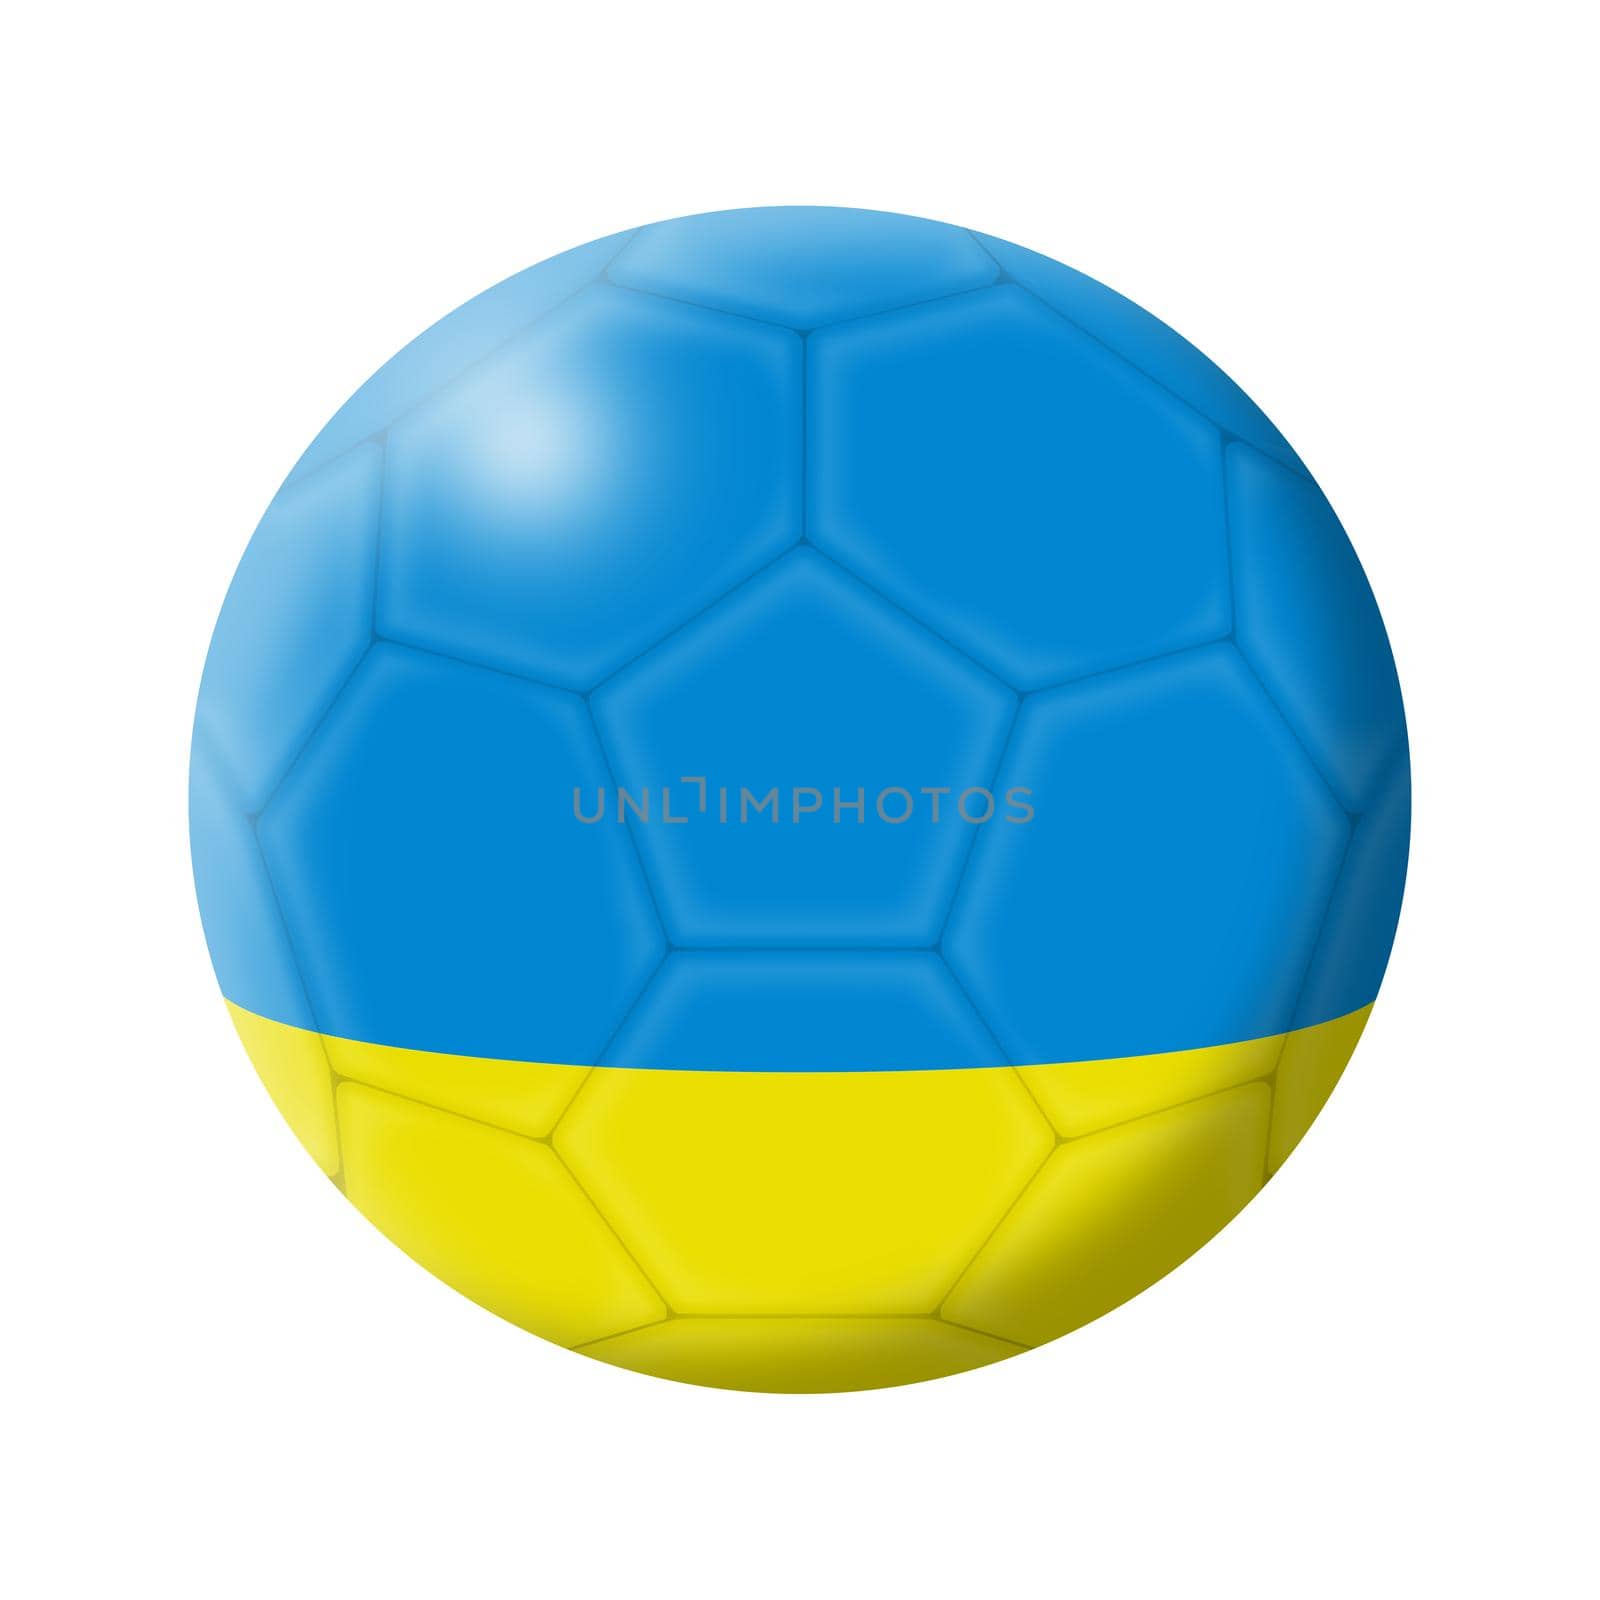 A Ukraine soccer ball football 3d illustration isolated on white with clipping path